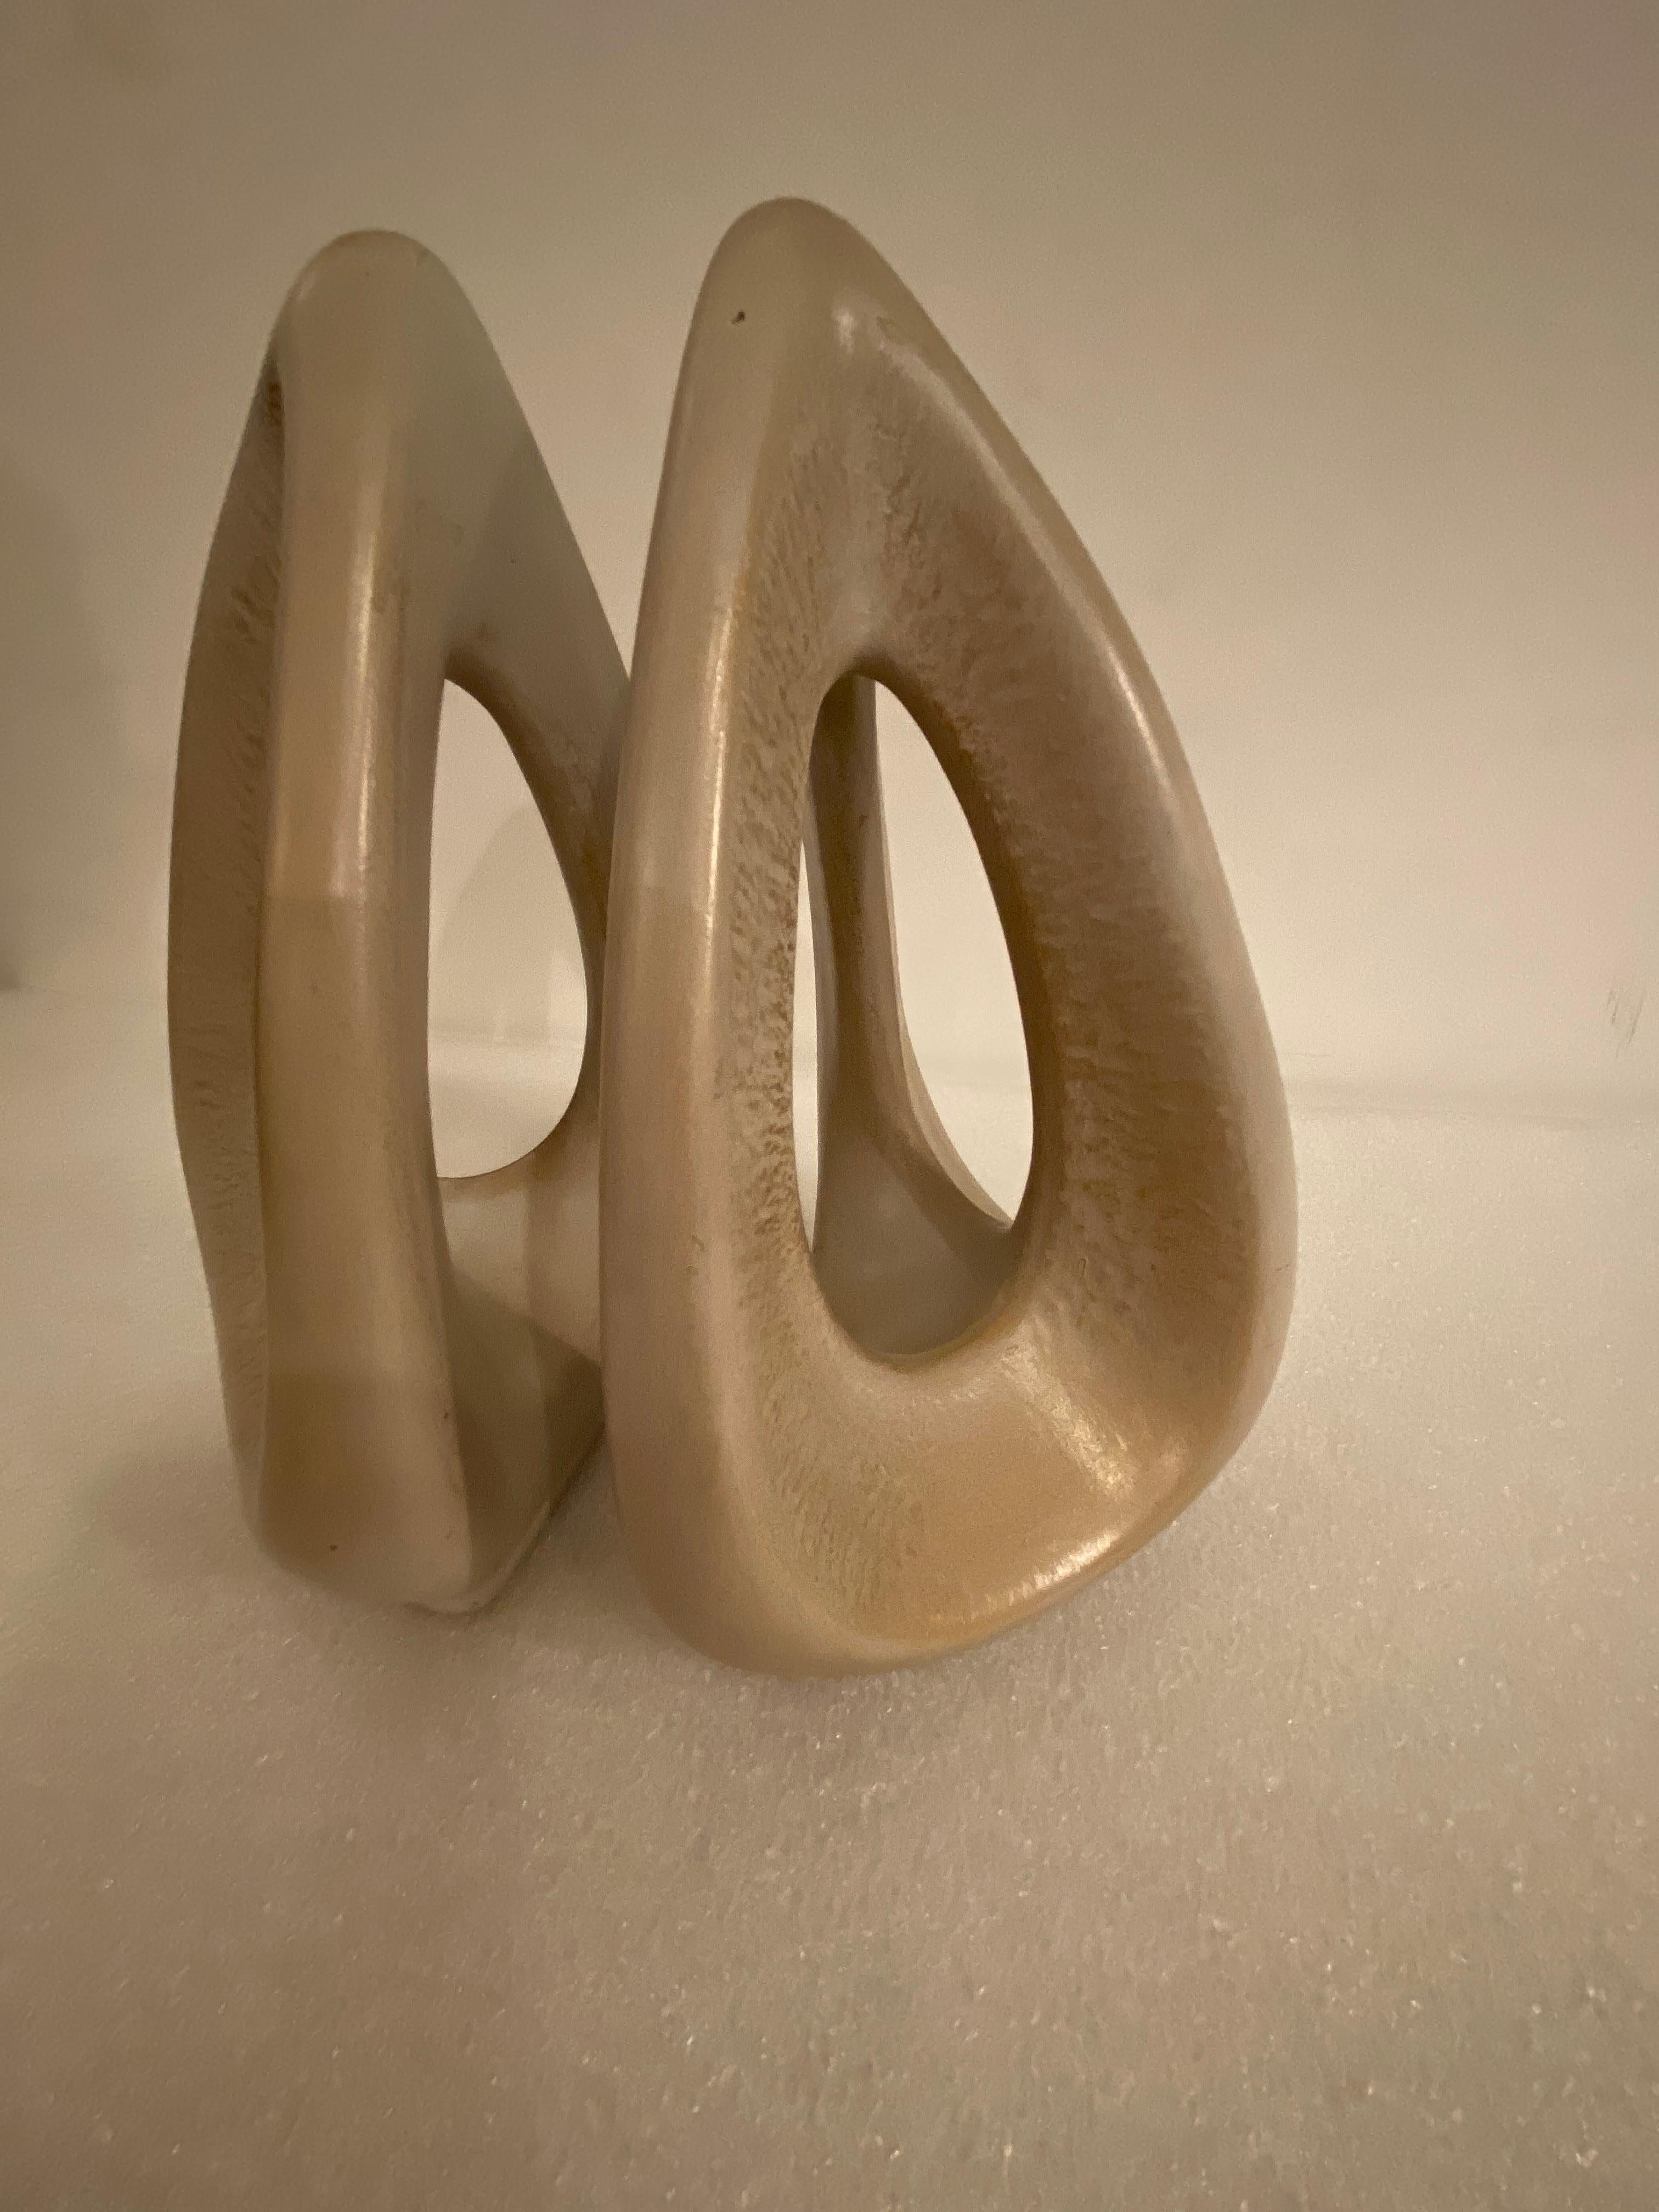 Abstract Ceramic Bookends In Good Condition For Sale In Philadelphia, PA